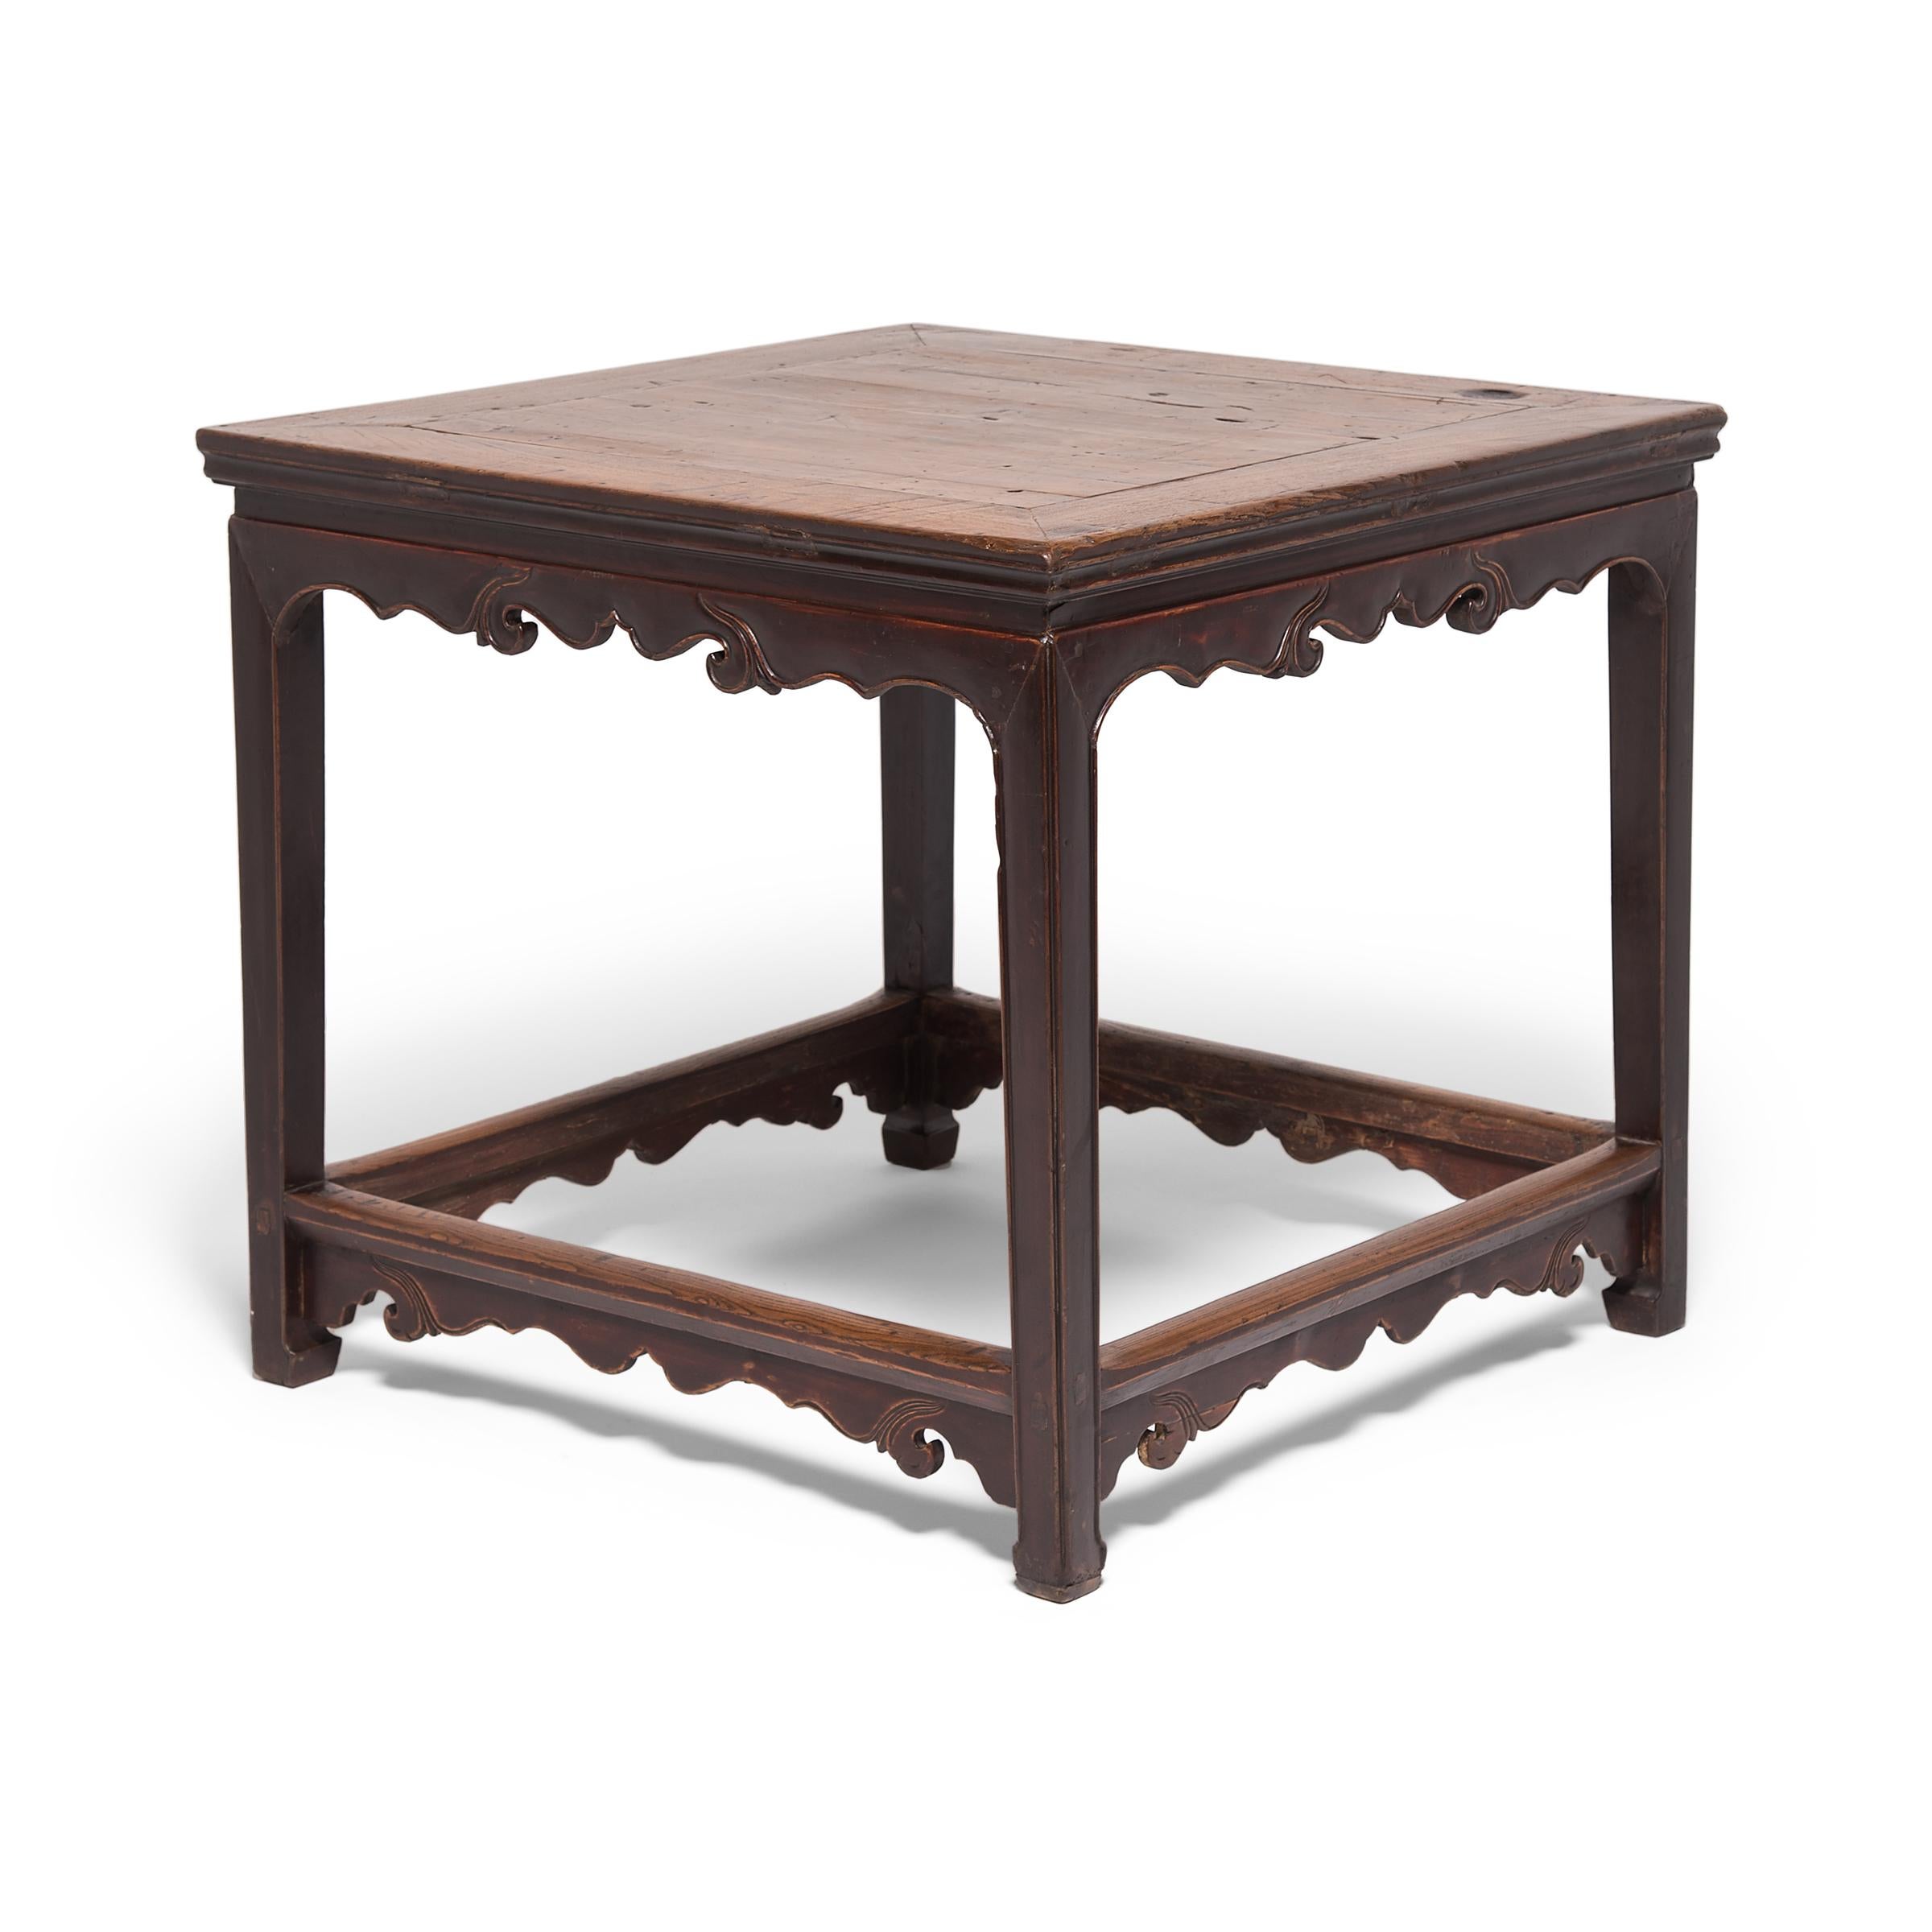 Named for its seating capacity, this 19th-century walnut table once gathered together a party of eight with a bench for two on each side. Handcrafted of walnut and cloaked in a layer of original lacquer, the table is distinguished by the finely